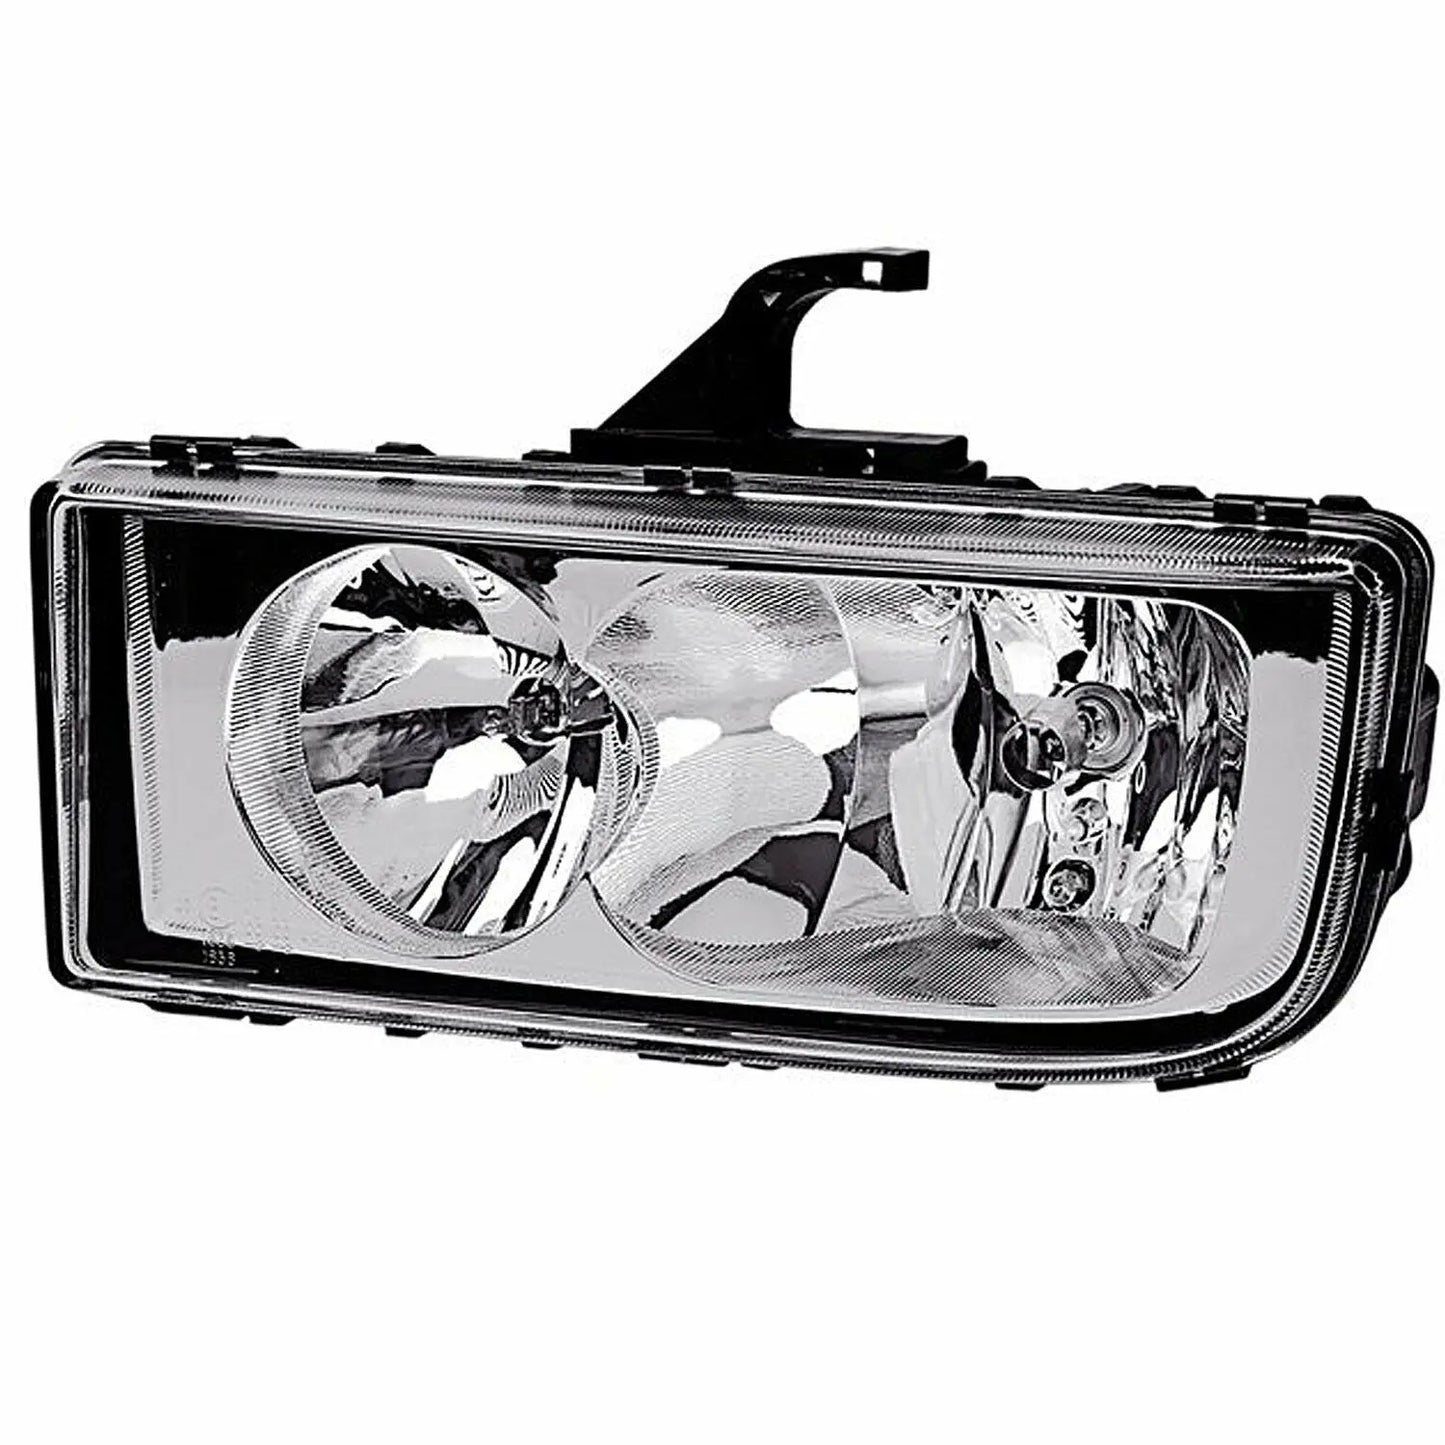 FANCHANTS 9408201561 9408200161 A9408201561 A9408200161  Headlamp  Manual, LHD,RHD With E Mark, Without Bulb, Left FOR BENZ Axor 2 Atego 2 FANCHANTS Aftermarket Auto Parts